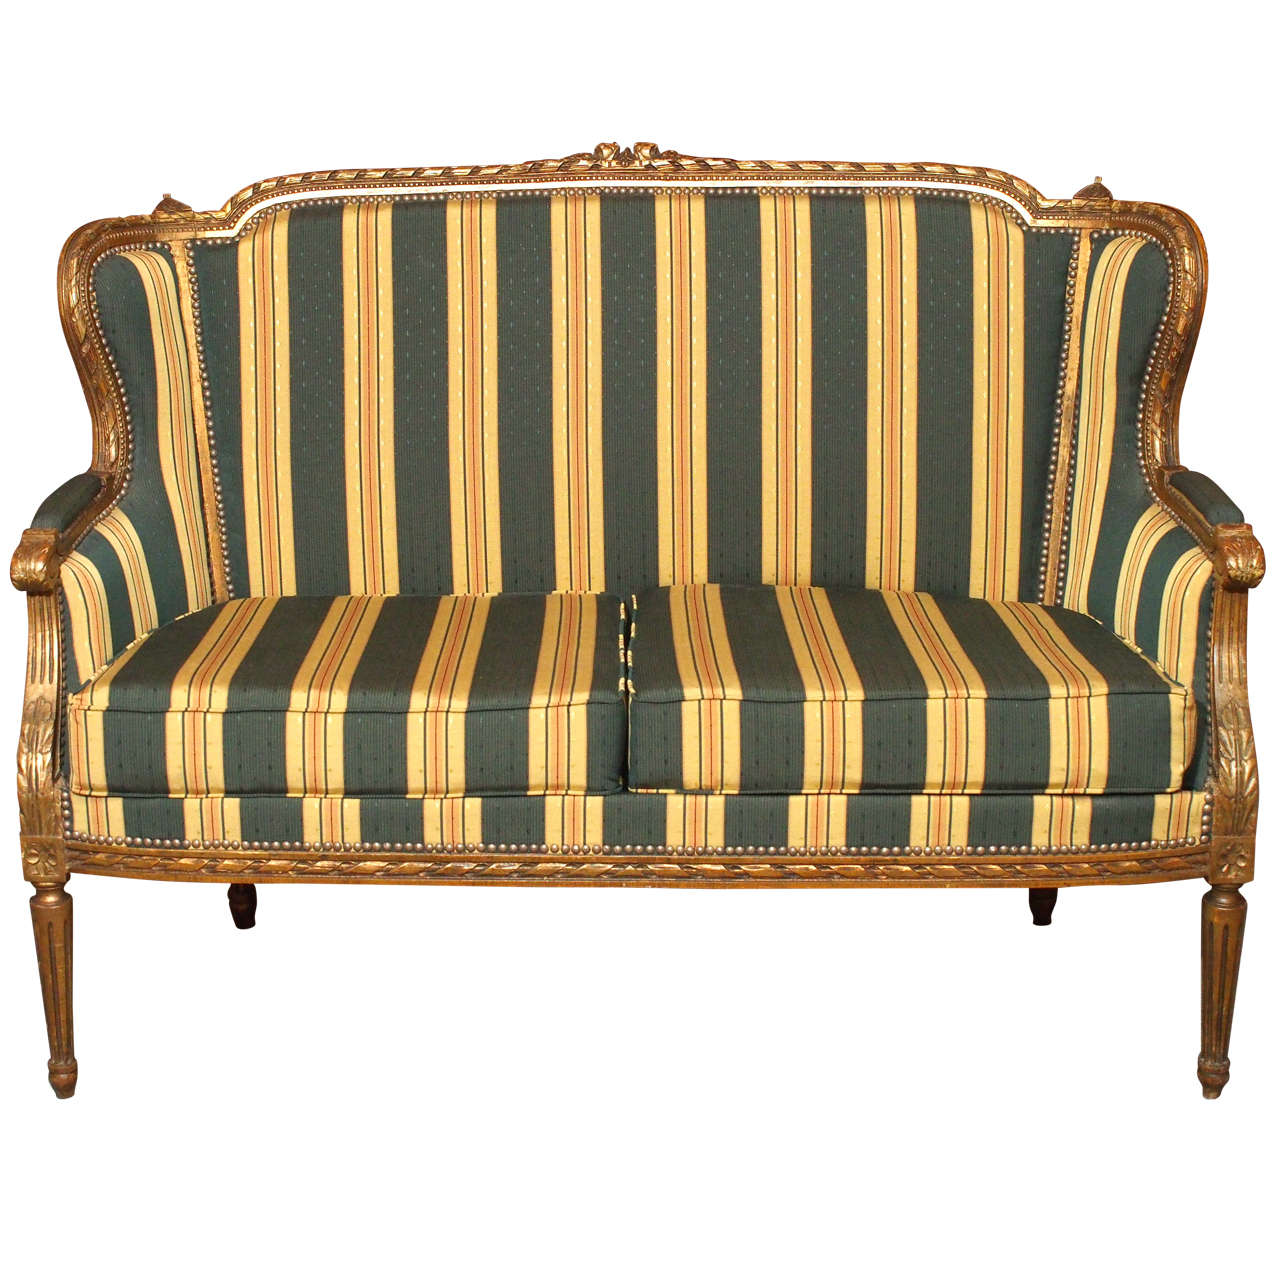 Antique French Gold Leaf Upholstered Canape